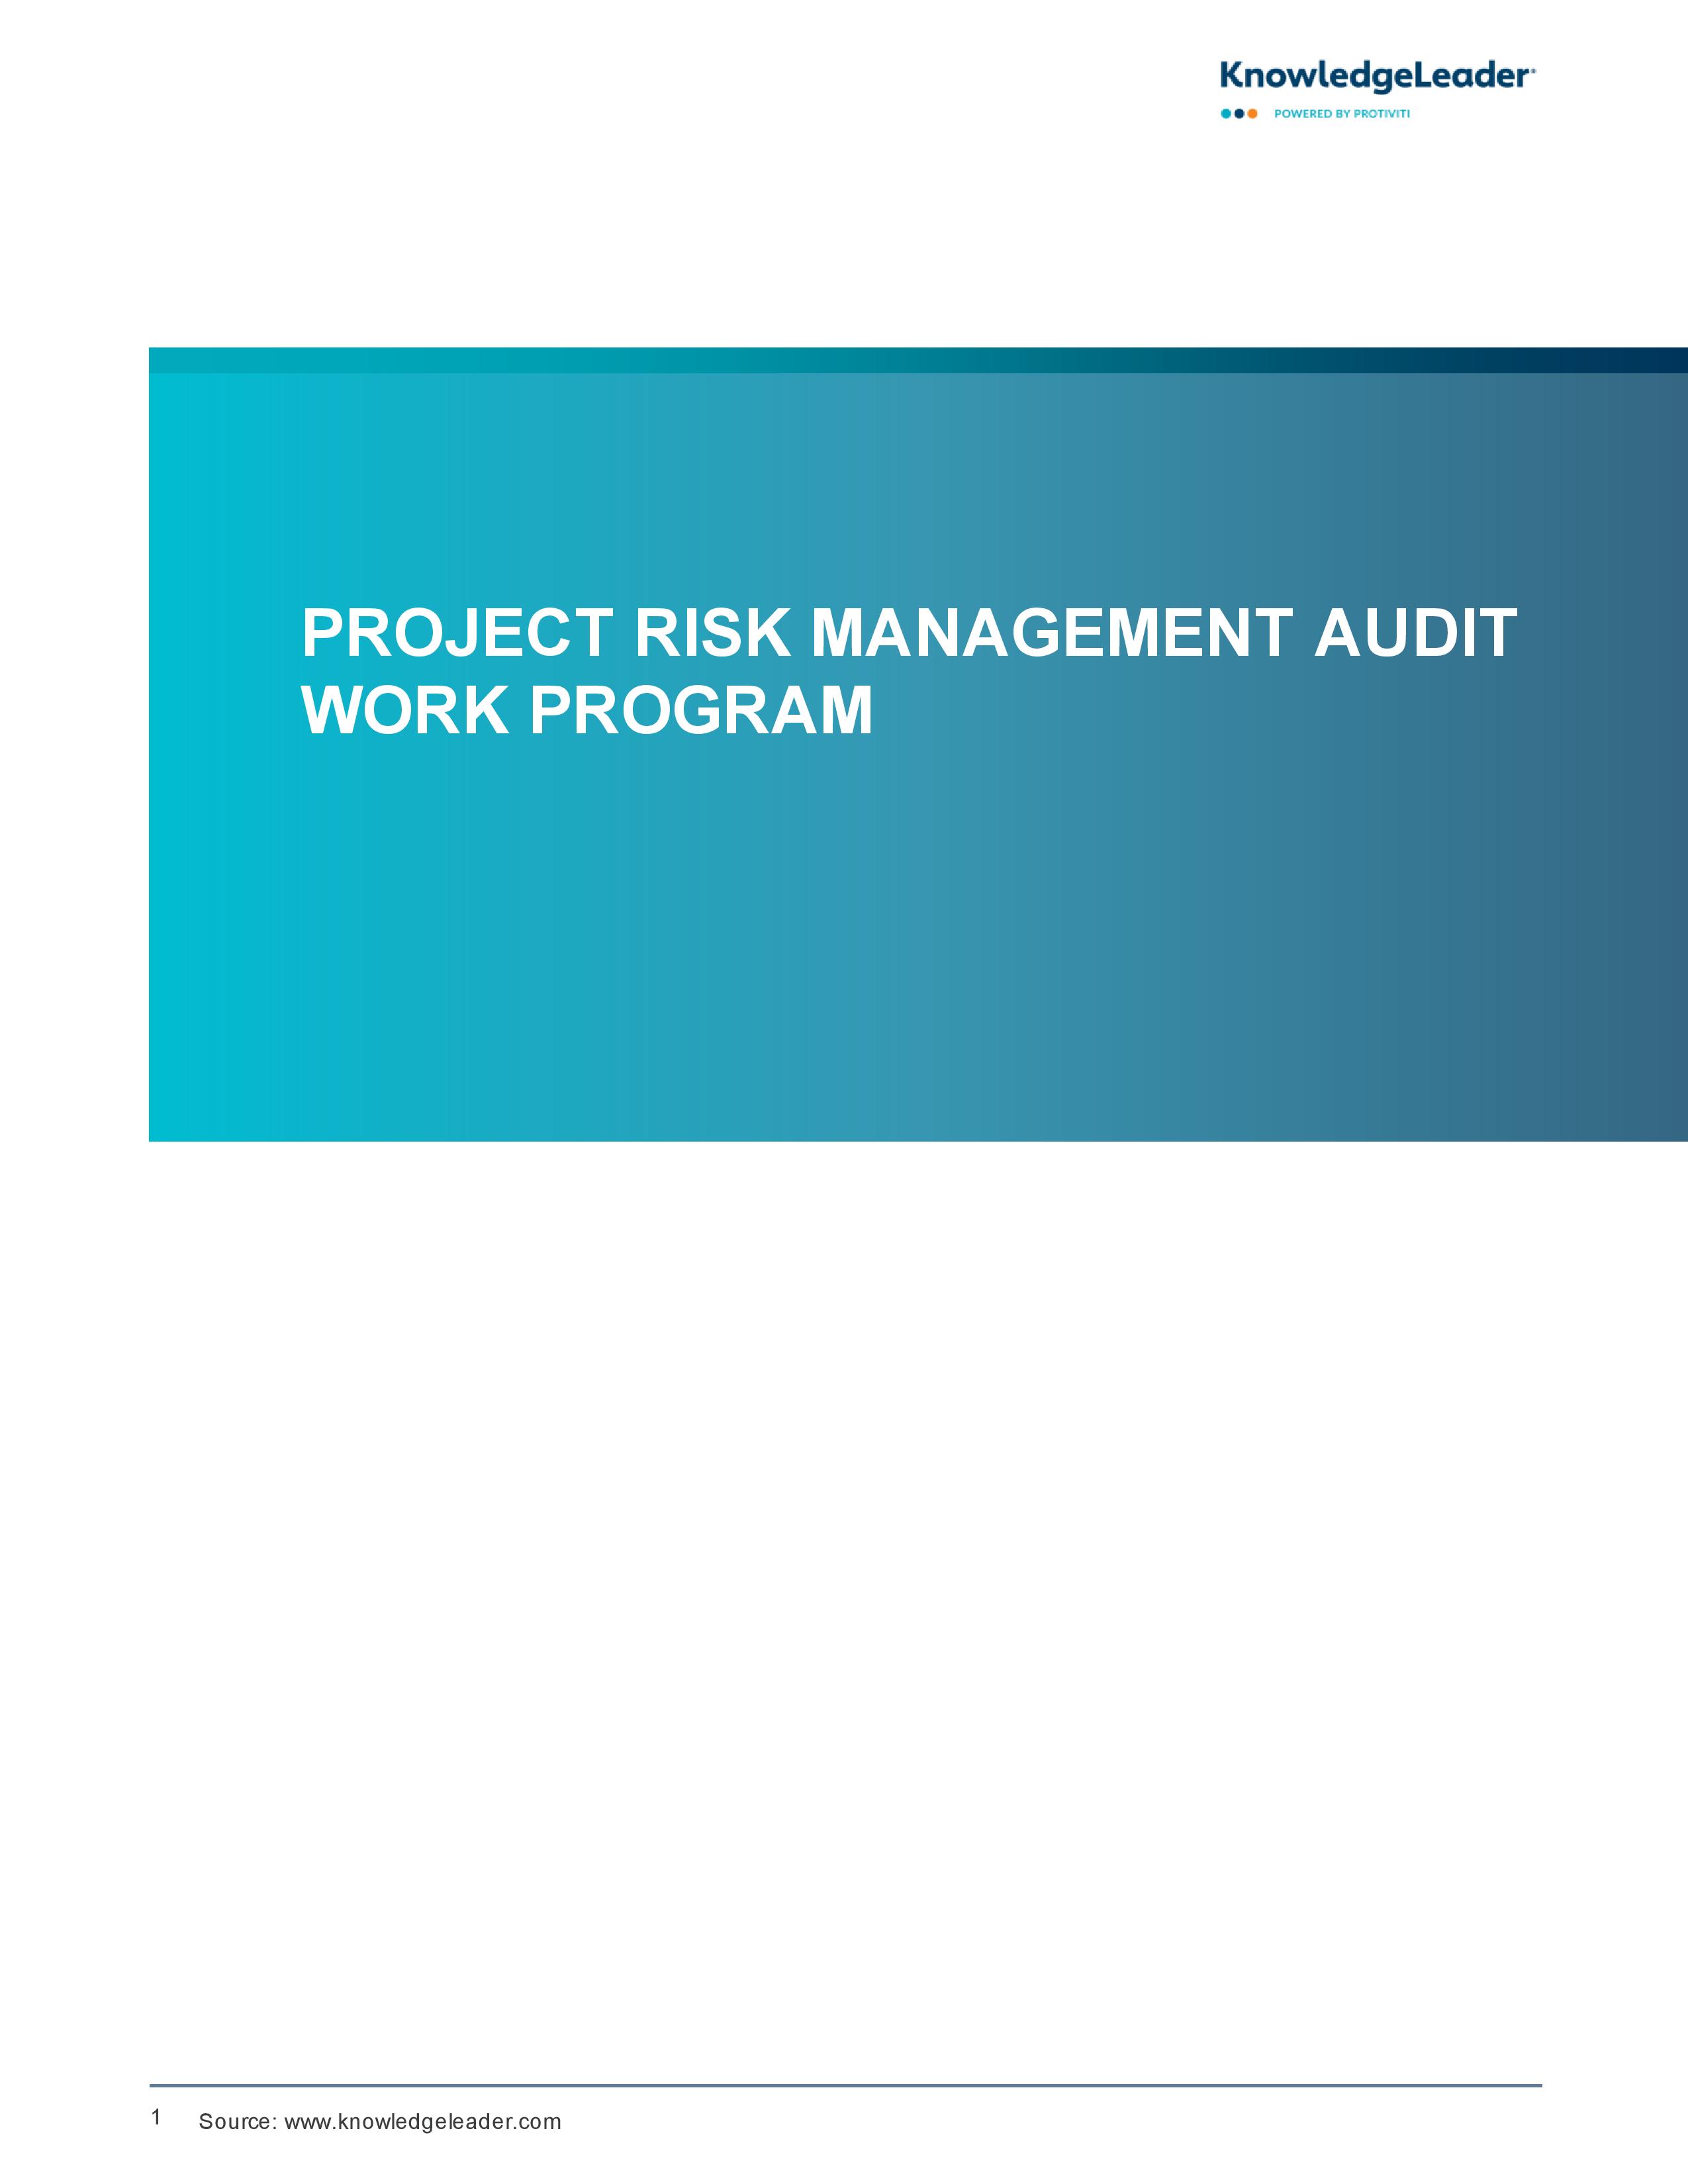 Screenshot of the first page of Project Risk Management Audit Work Program